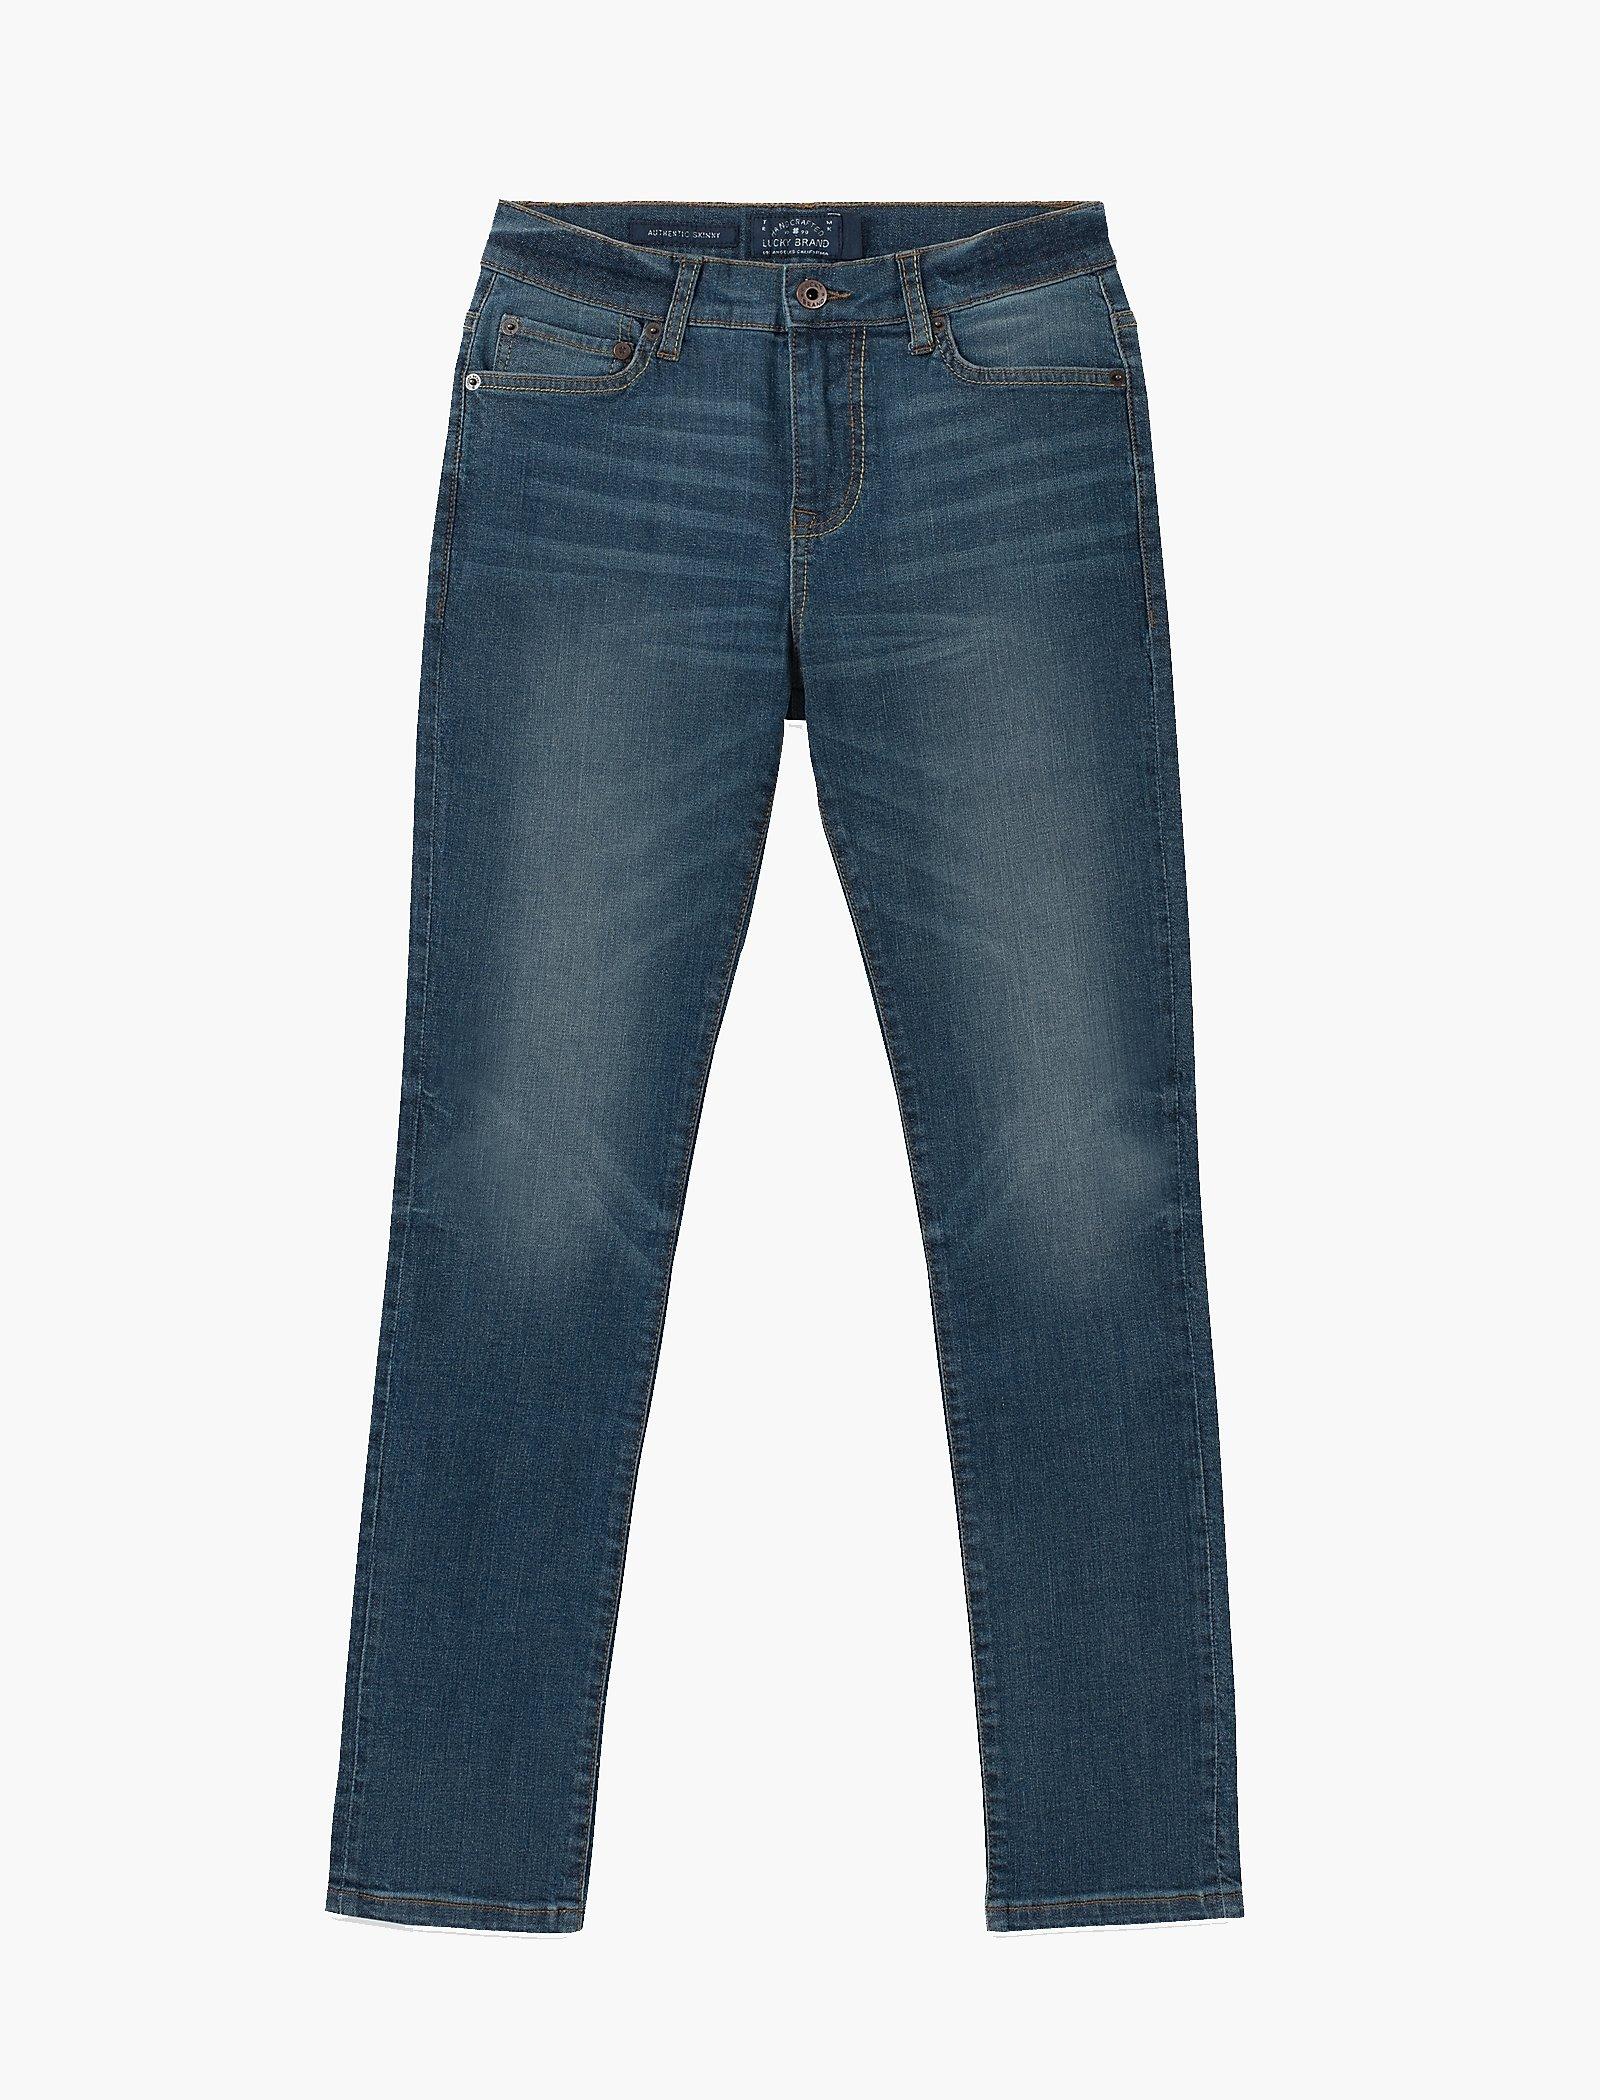 lucky brand jeans cost